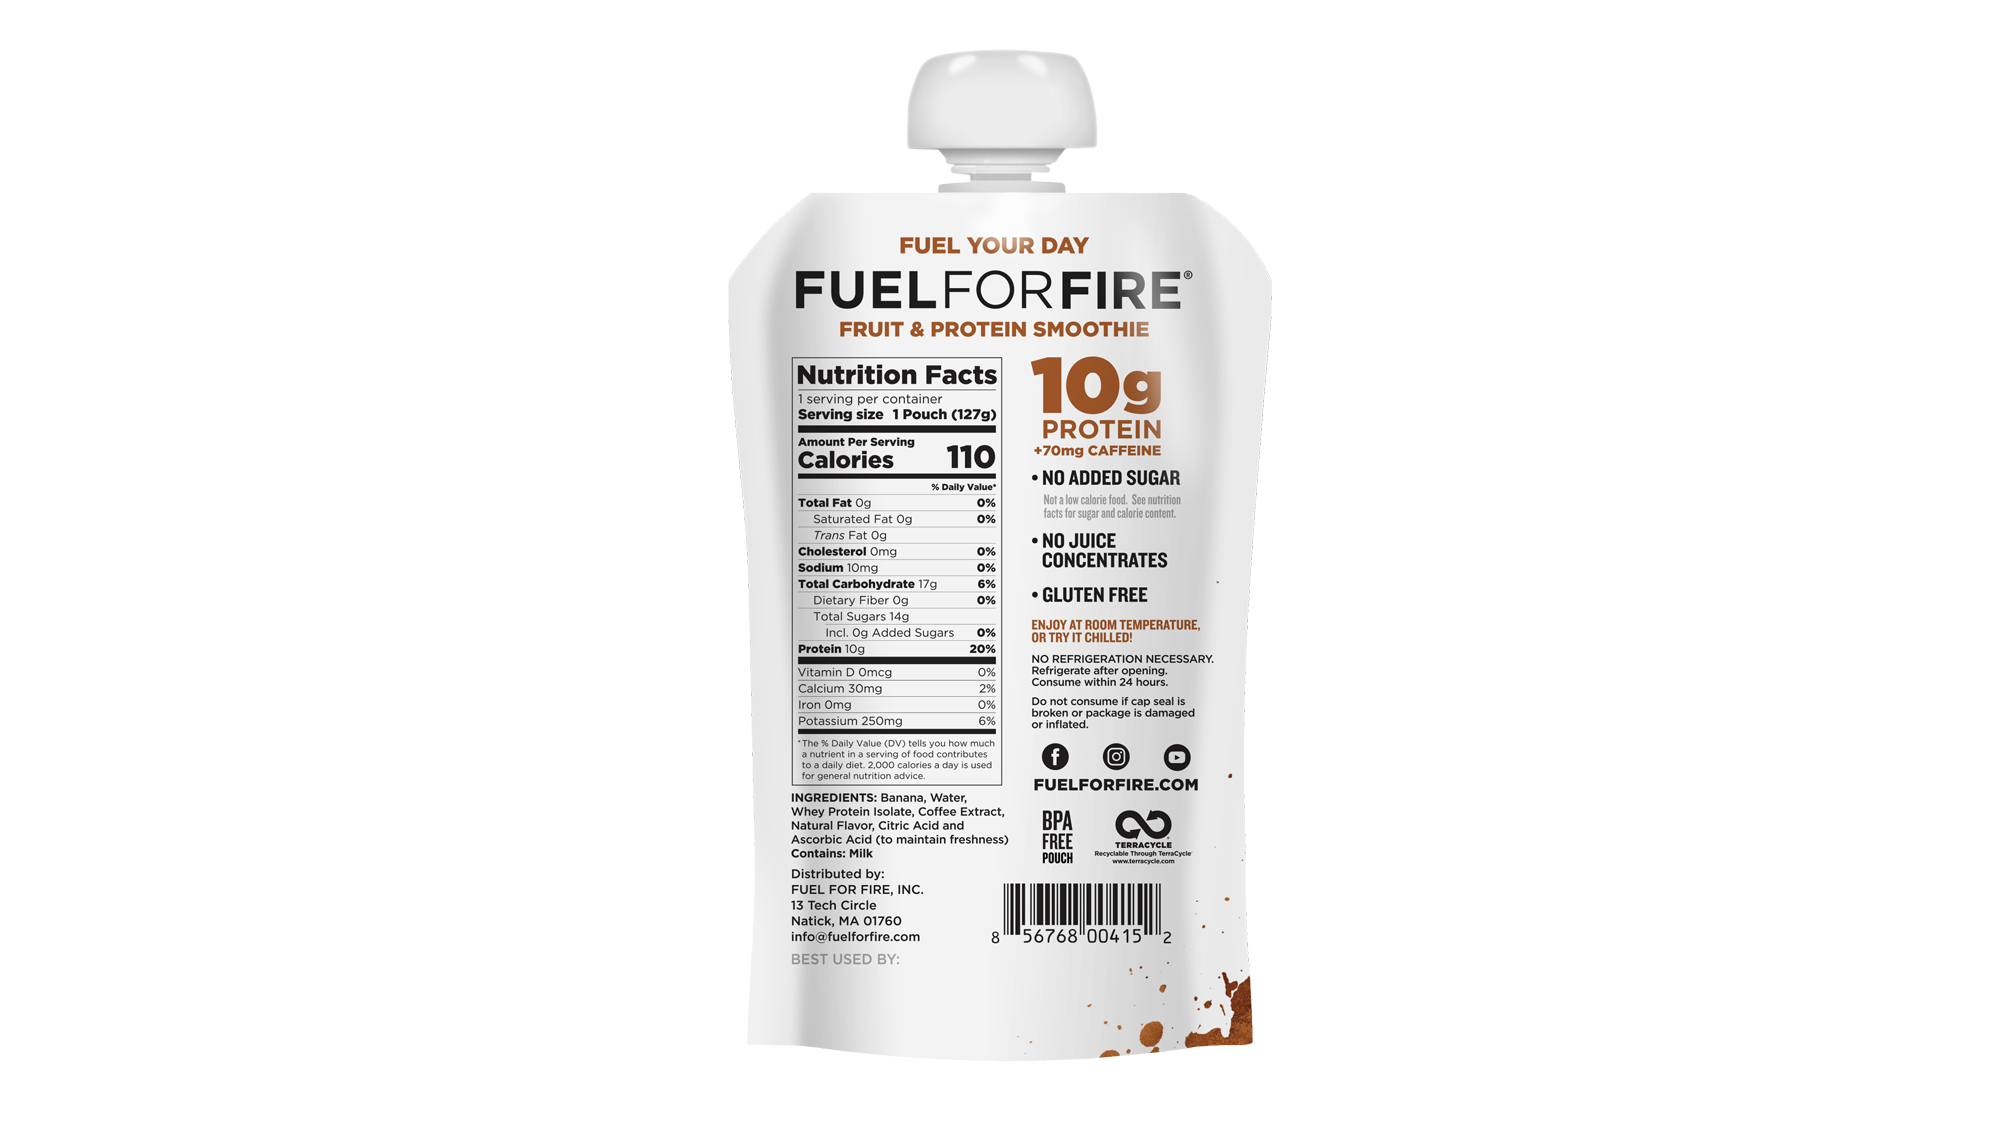 Fuel for Fire - Coffee - 6 Pack